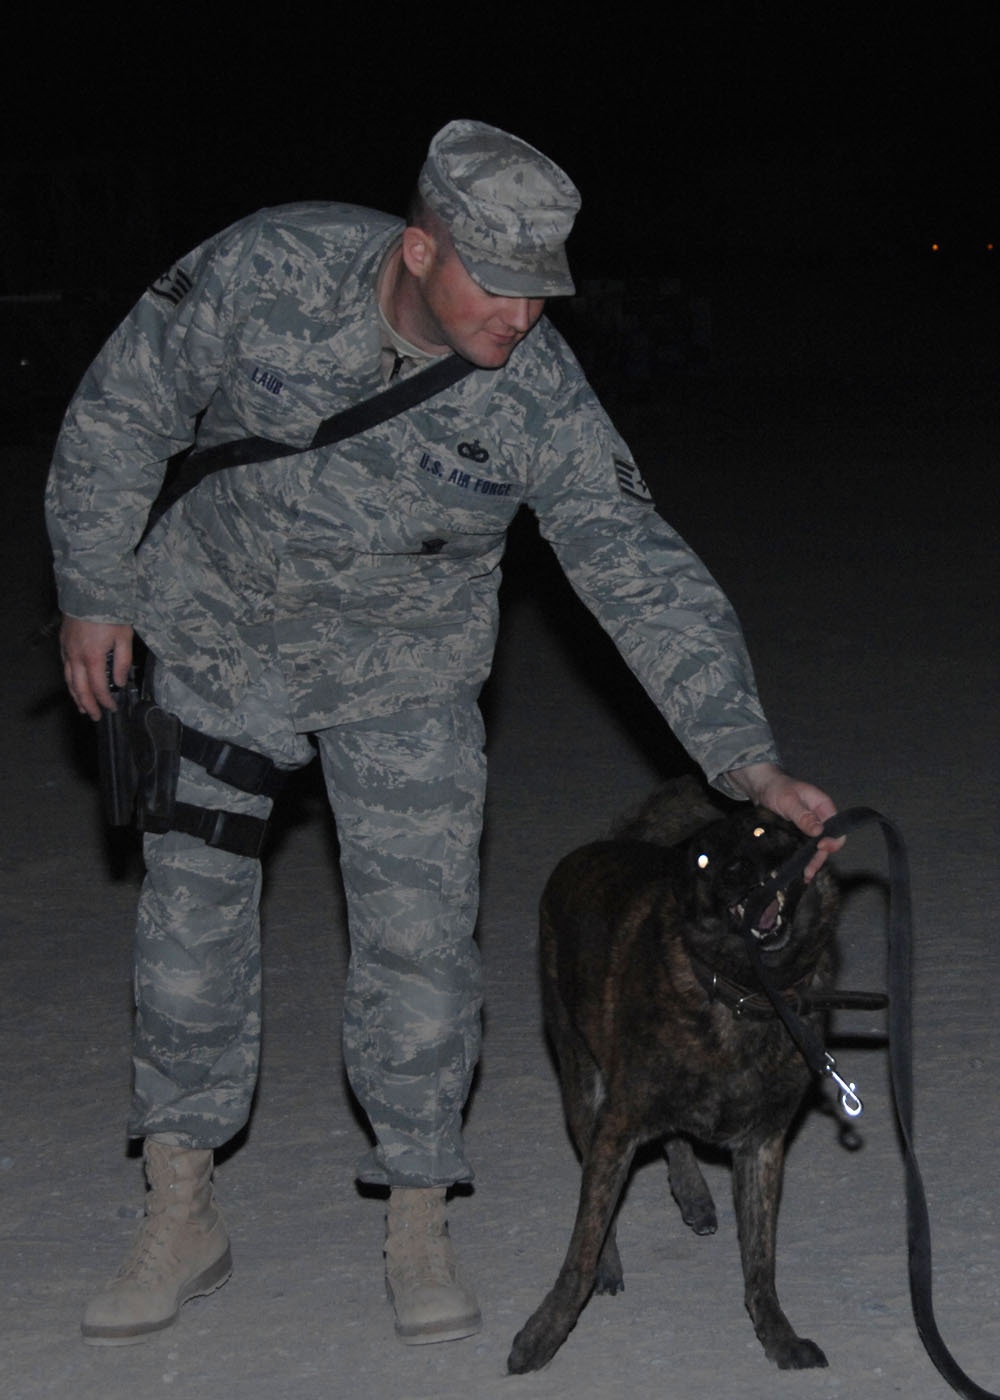 Security Forces Handler and K-9 Head to Iraq